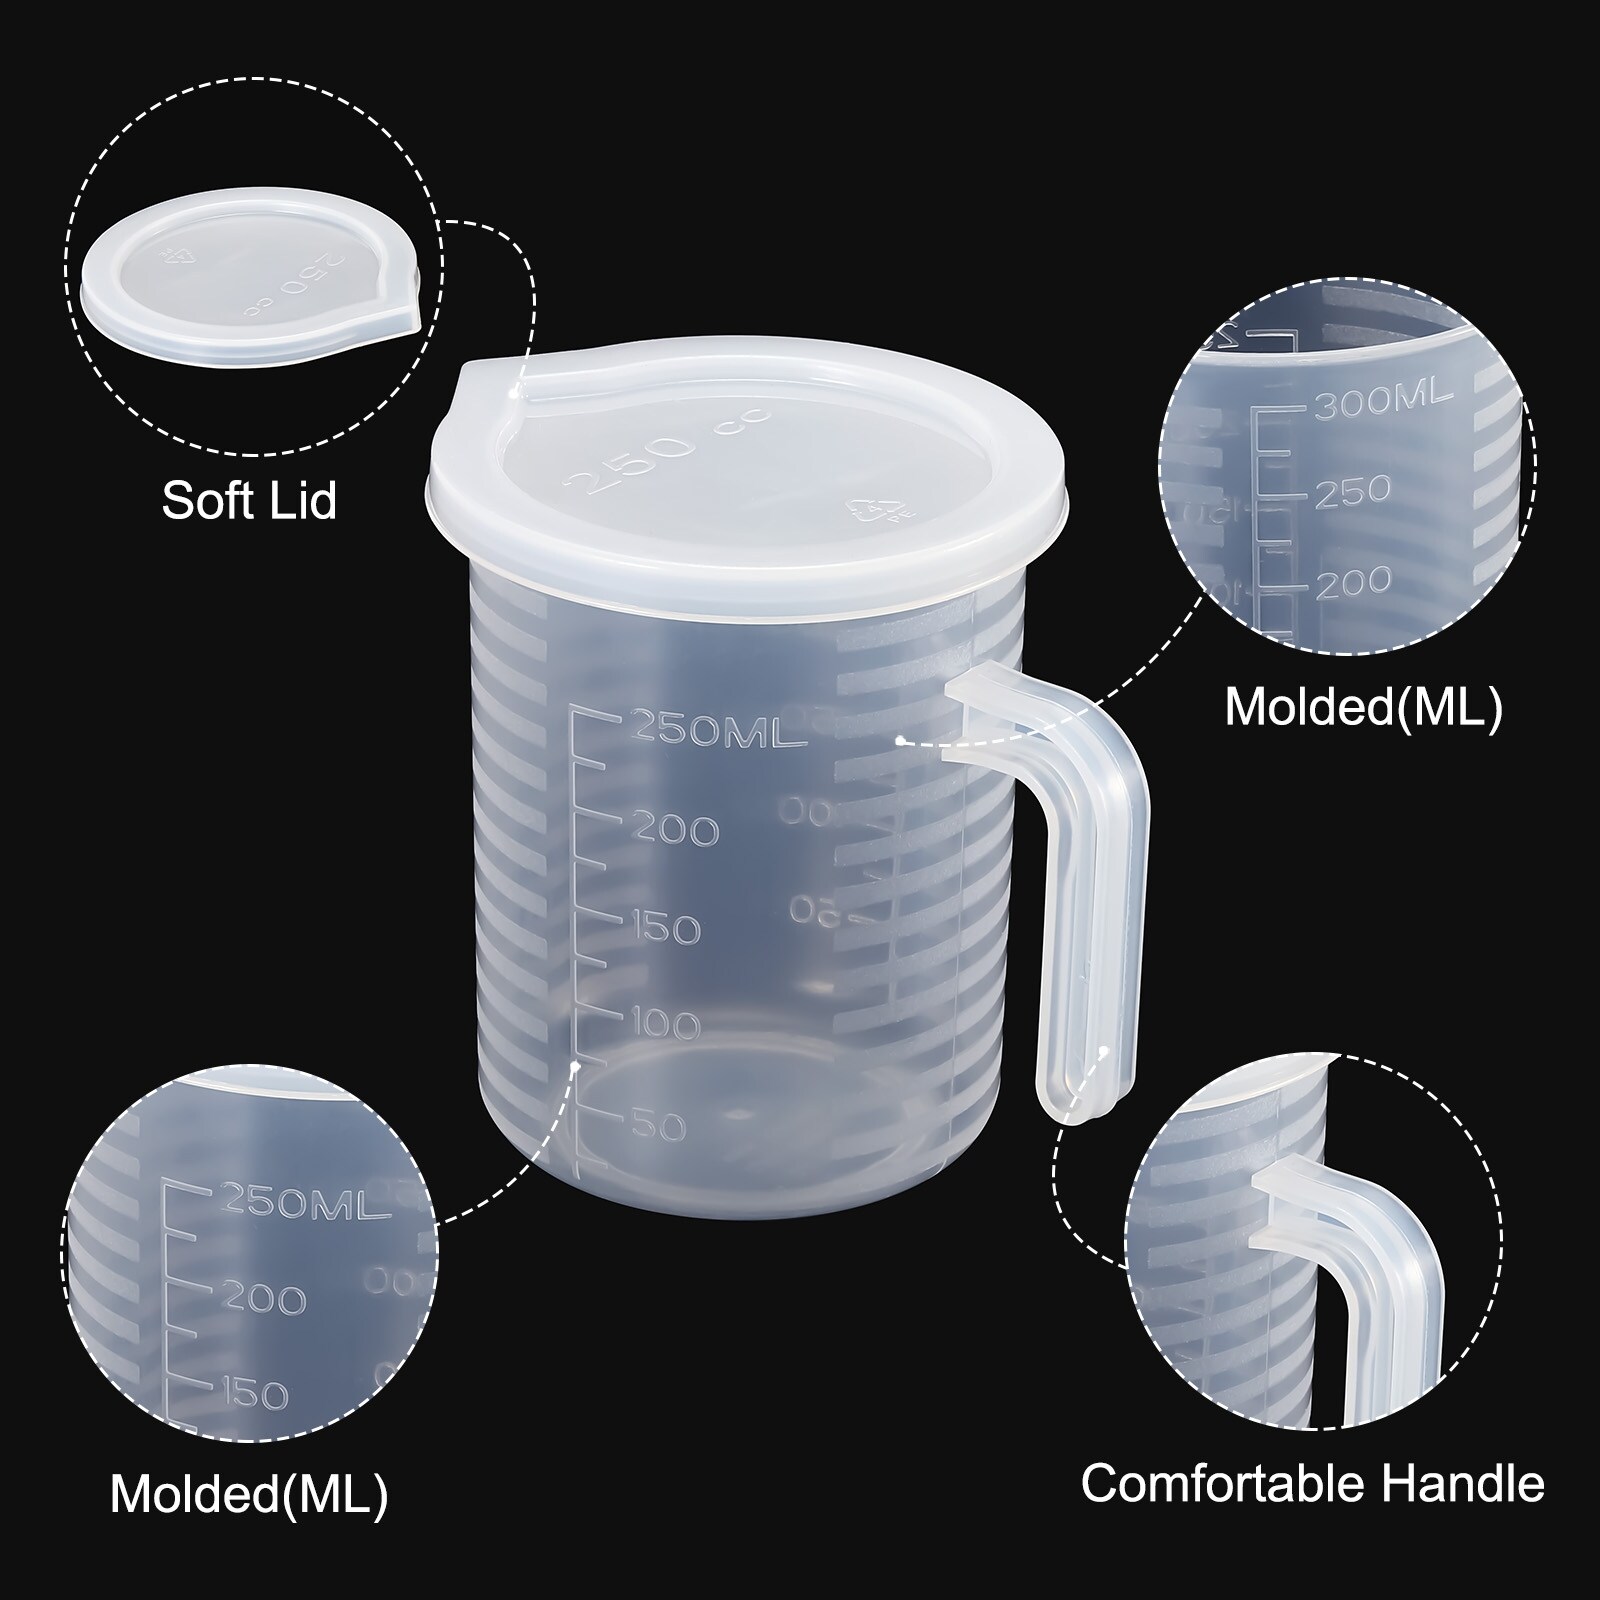 Twin Pack 300ml Cups